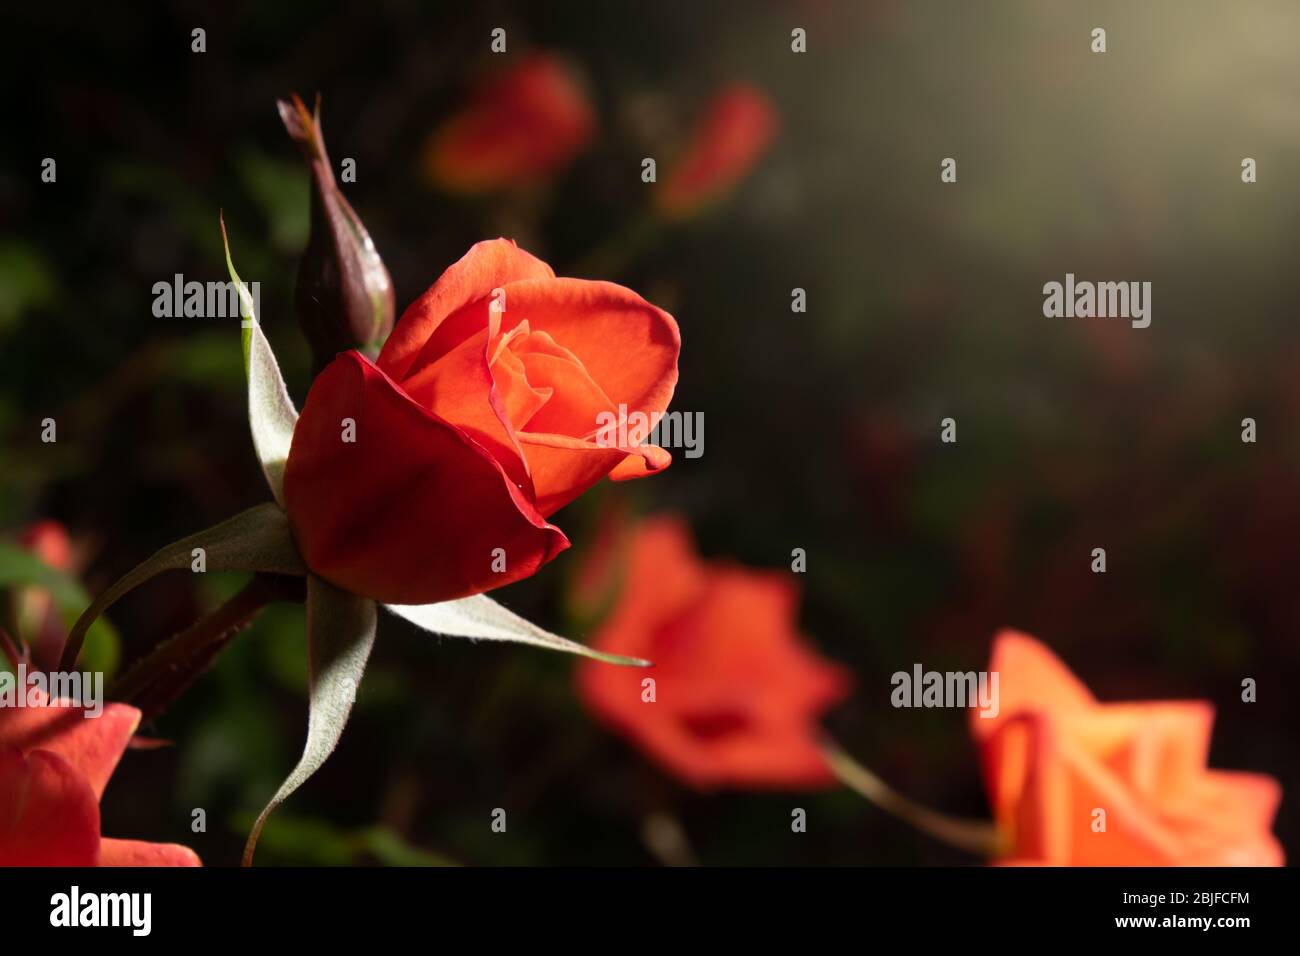 Red rose close up in dramatic sunset light with copy space for text. Greeting card for mothers day. Stock Photo